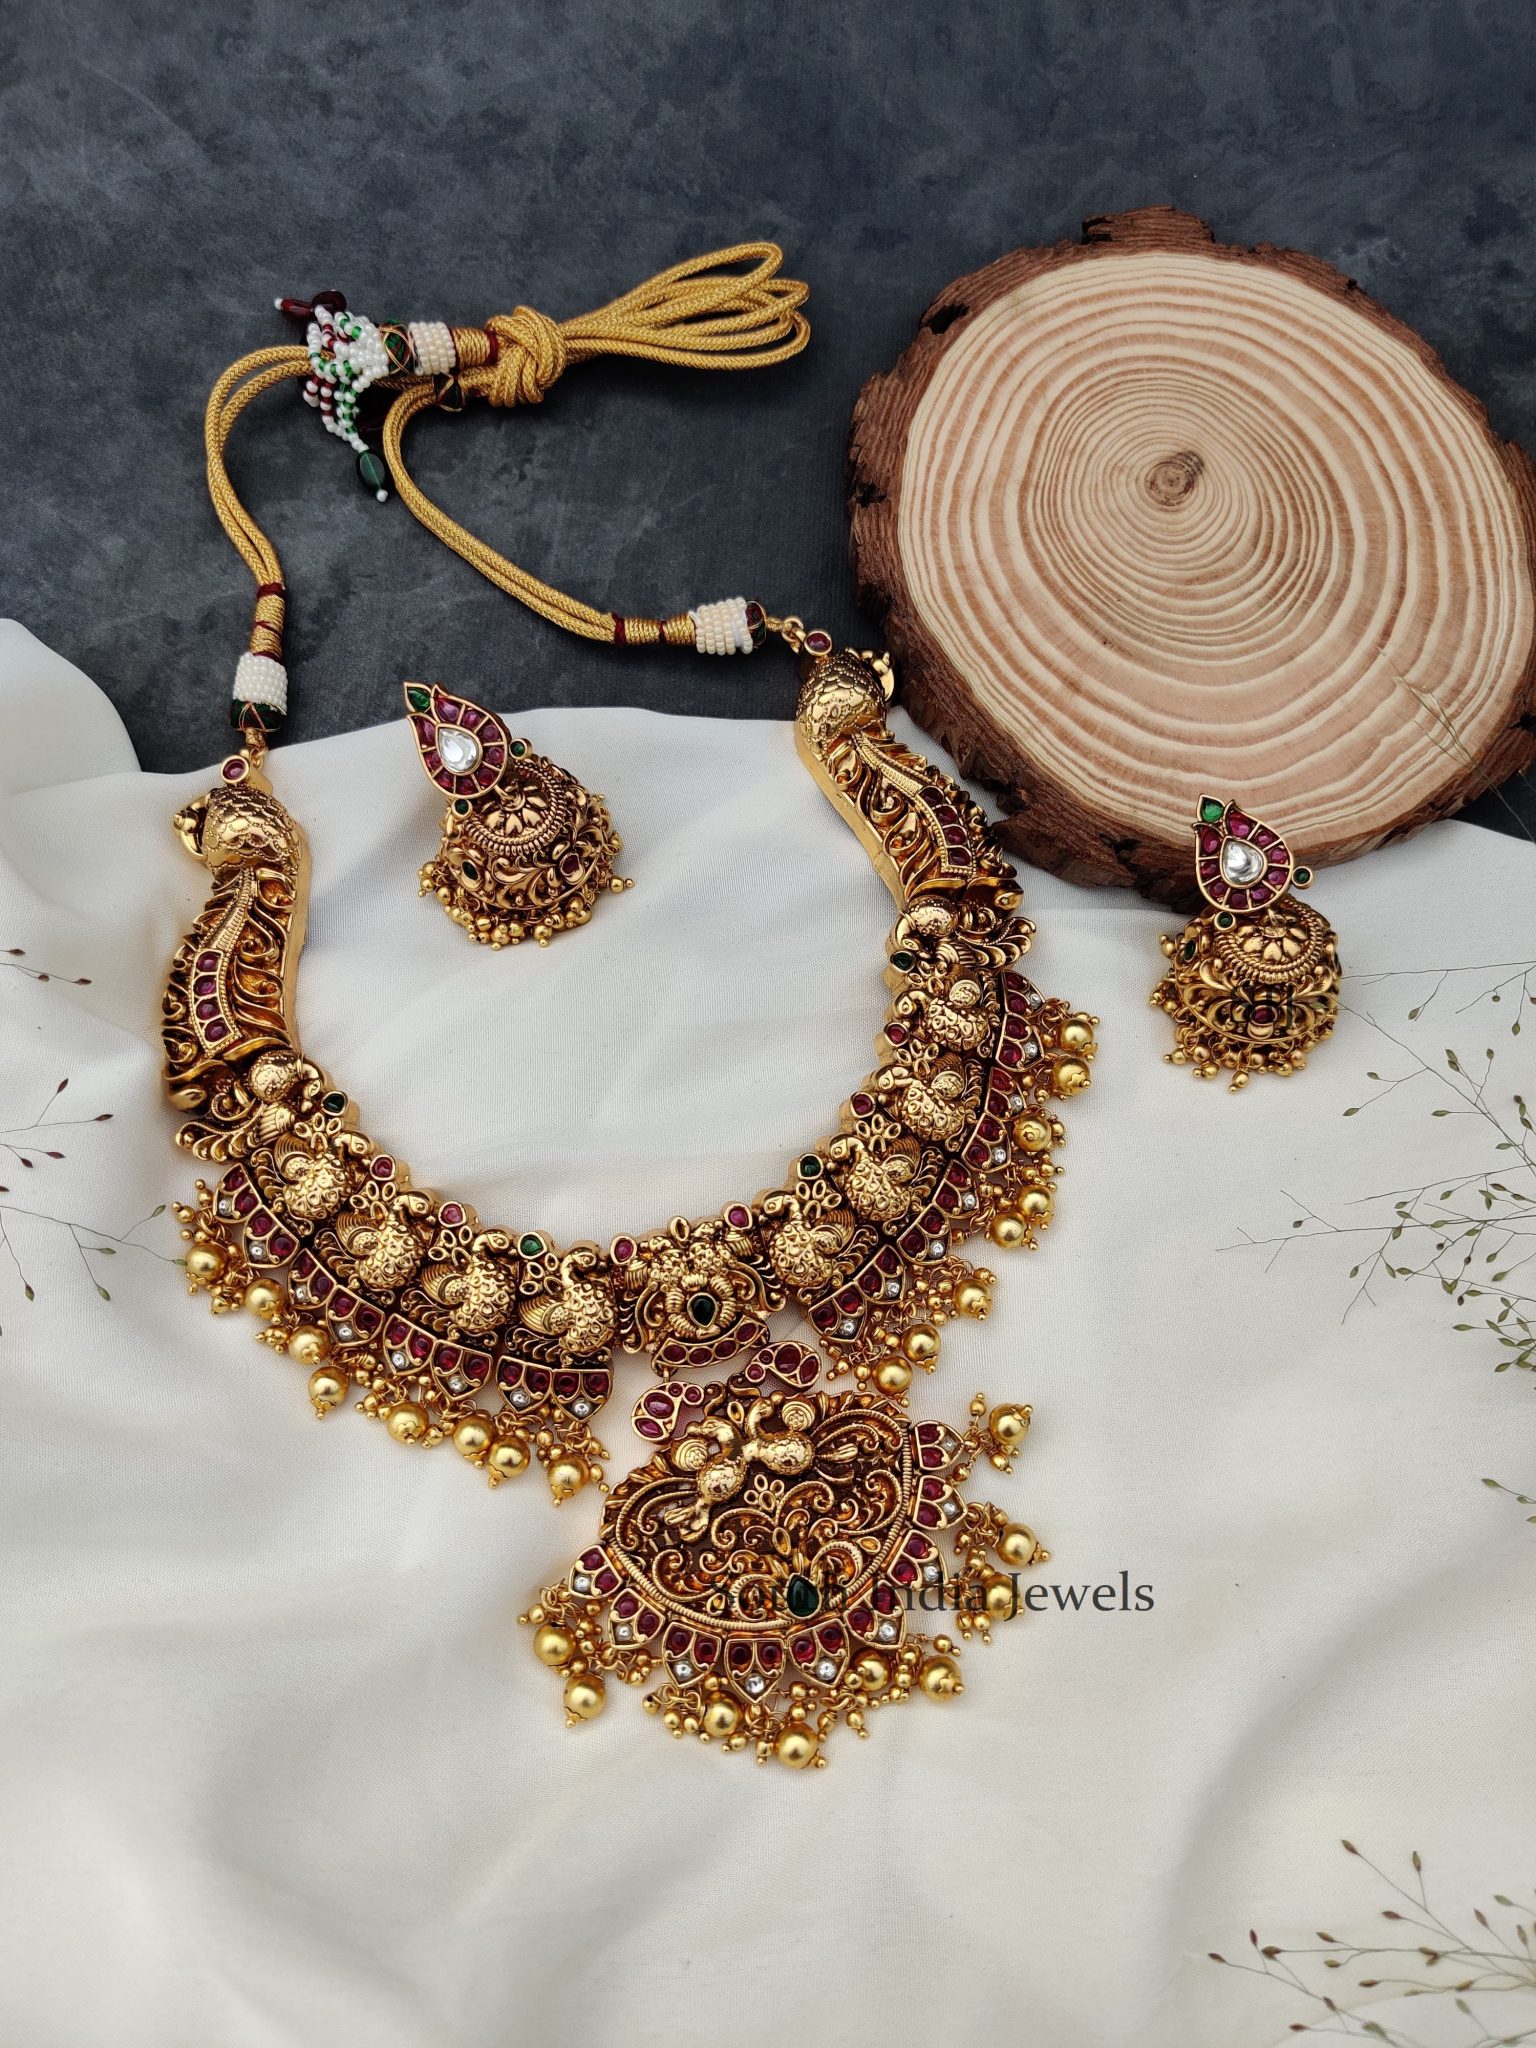 Floral antique Gold Necklace - South India Jewels